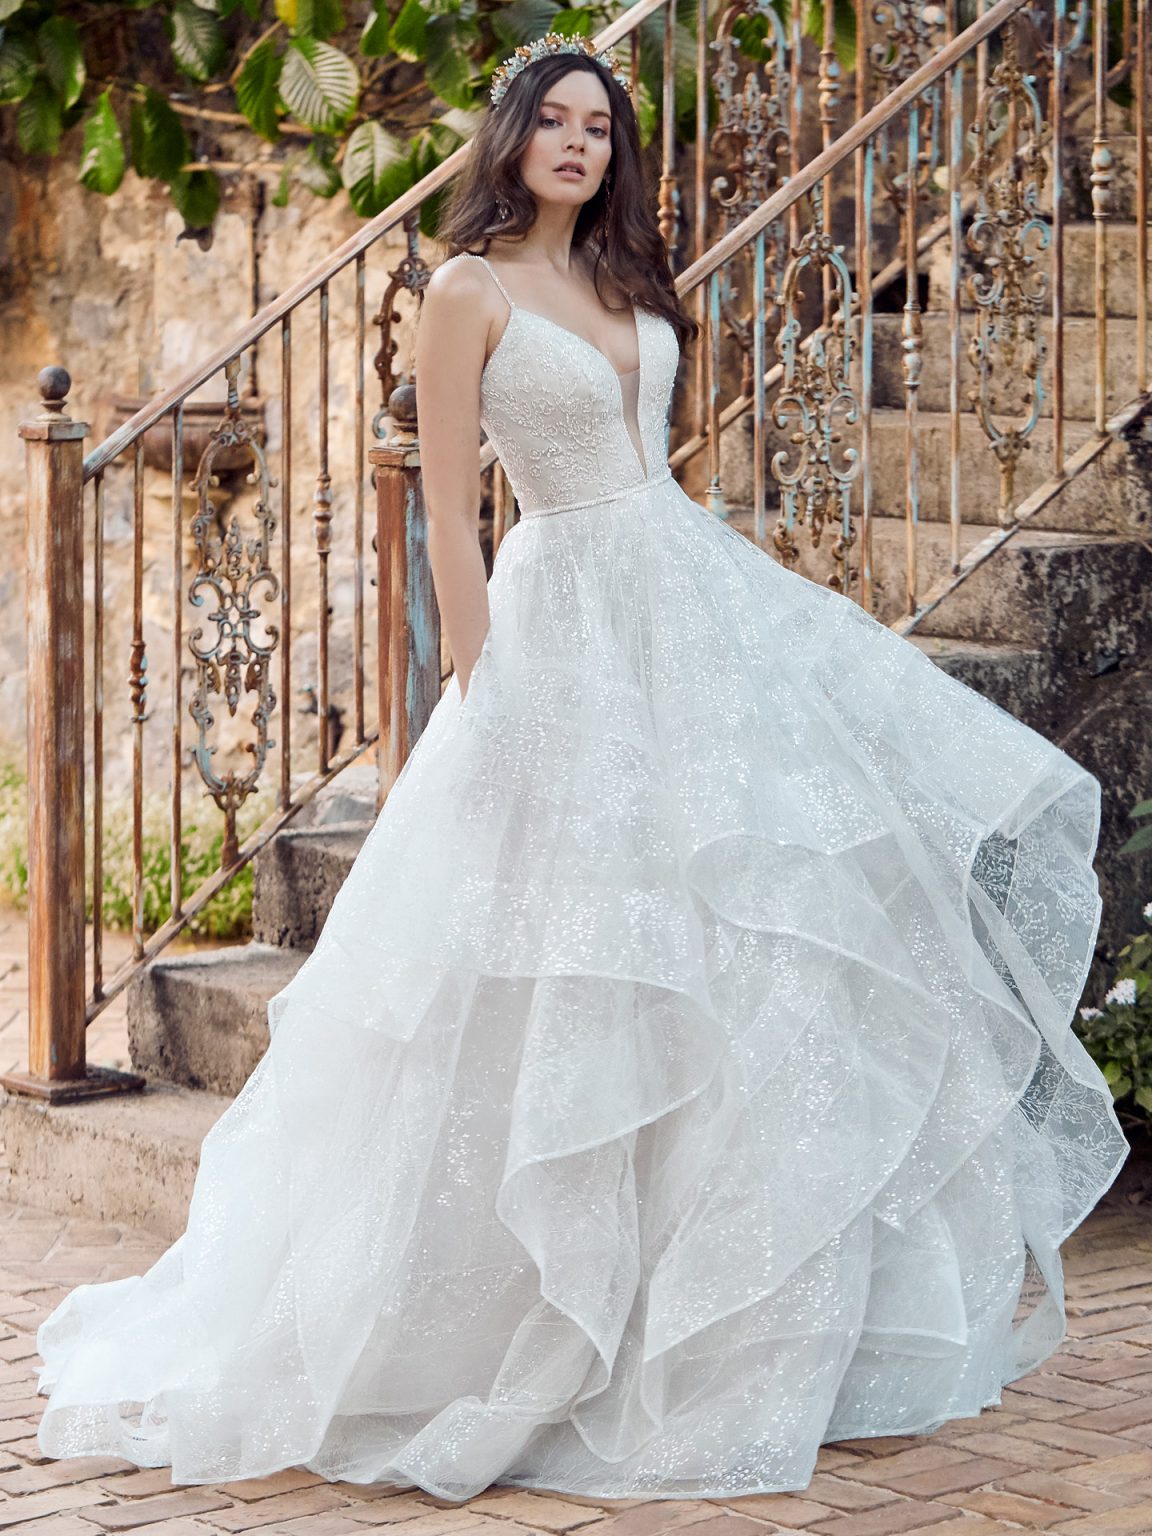 Wedding Dress Budget: Tips on How to Afford Your Dream Dress